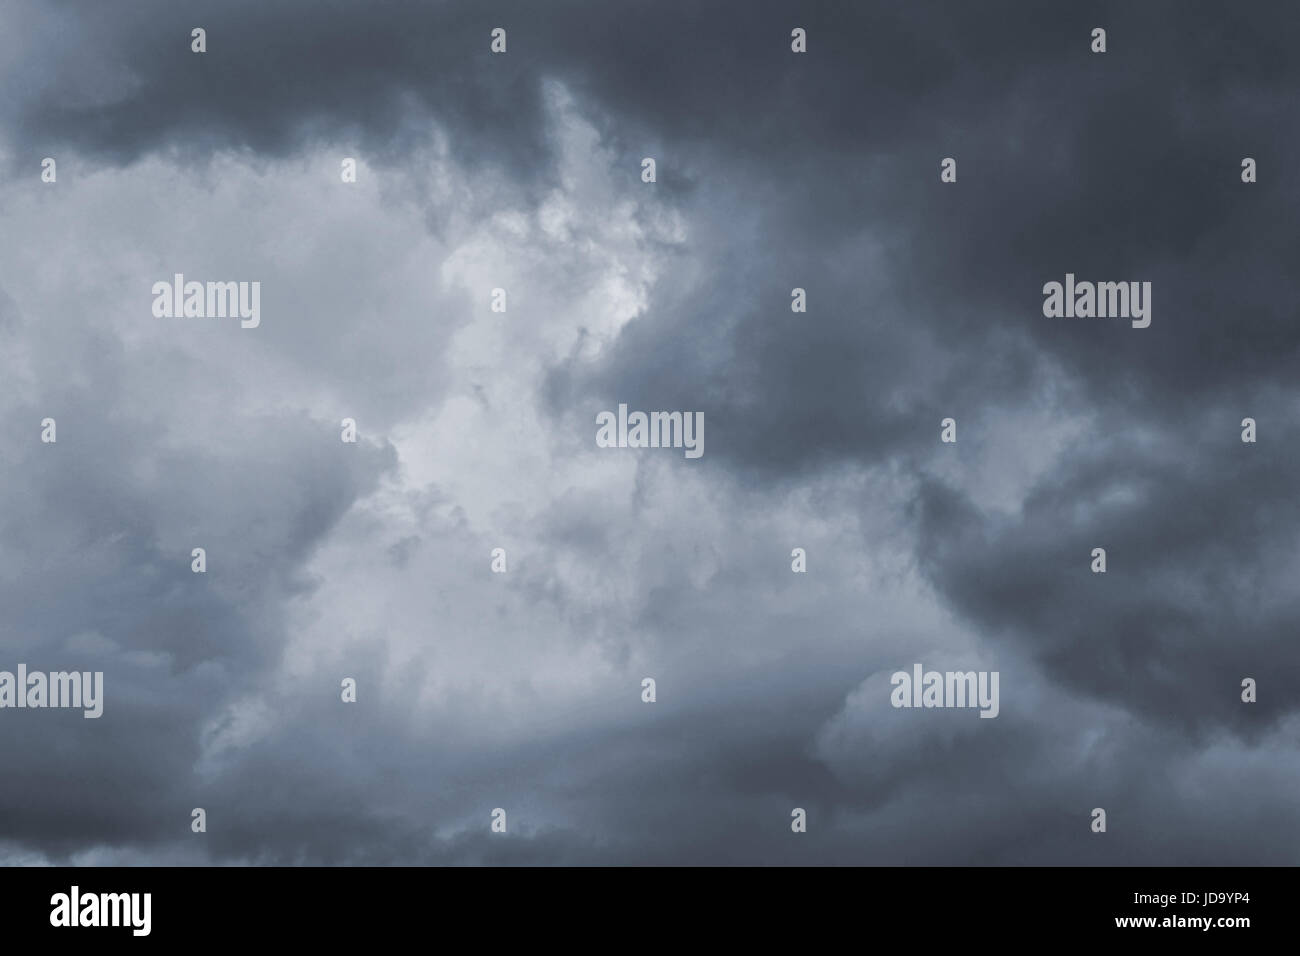 Dark sky with storm clouds, Dramatic black cloud and thunderstorm Stock Photo